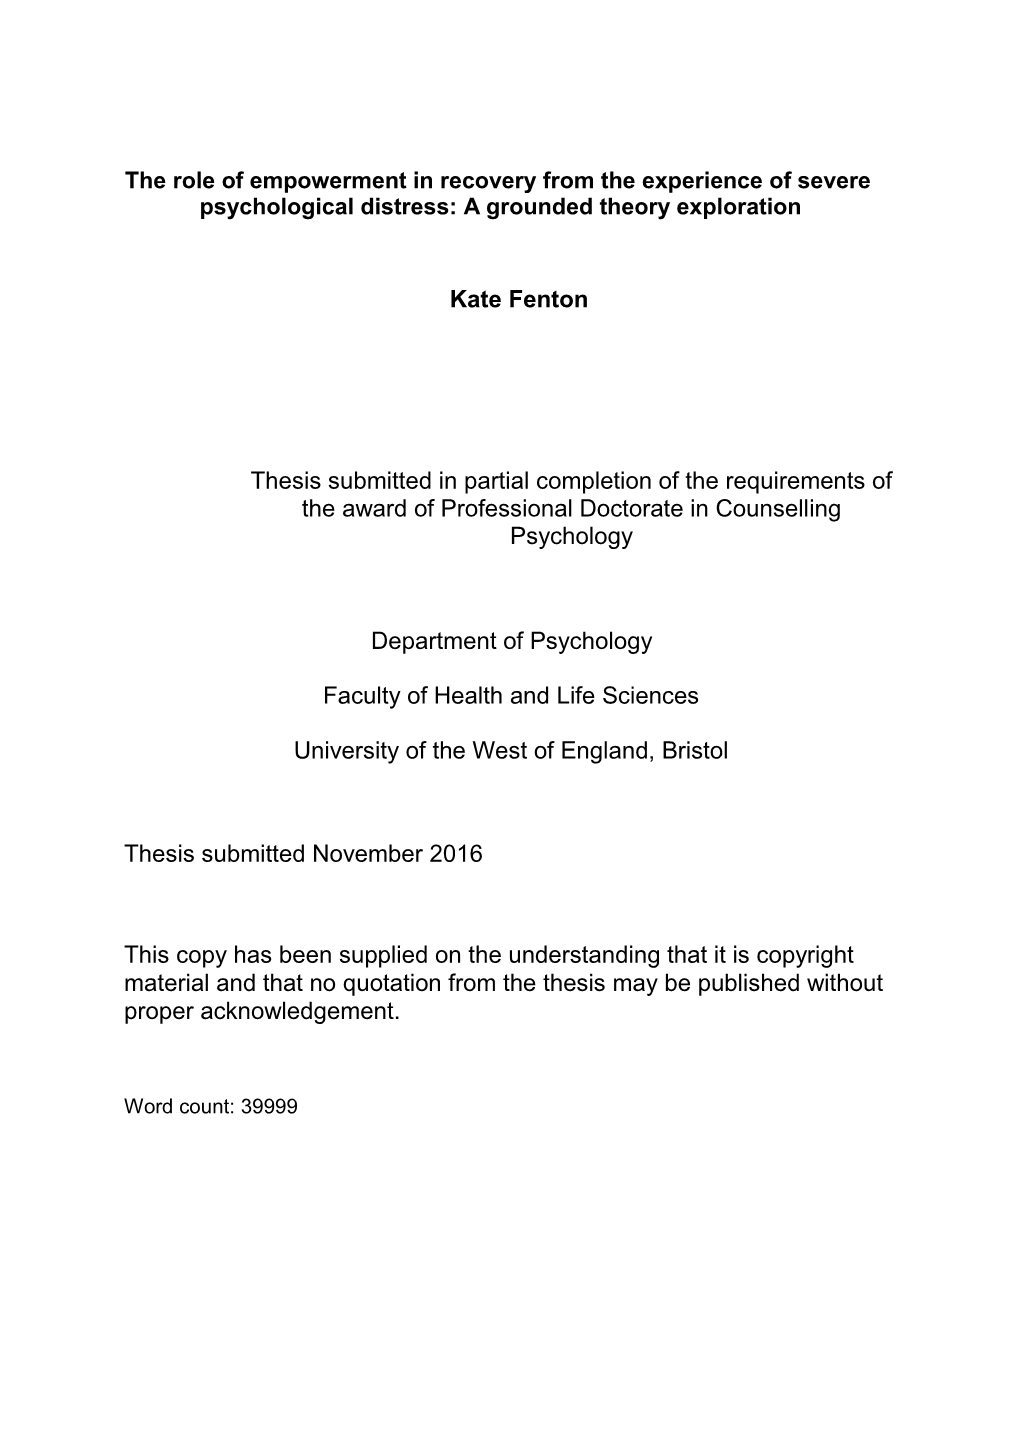 Kate Fenton Thesis Submitted in Partial Completion of The